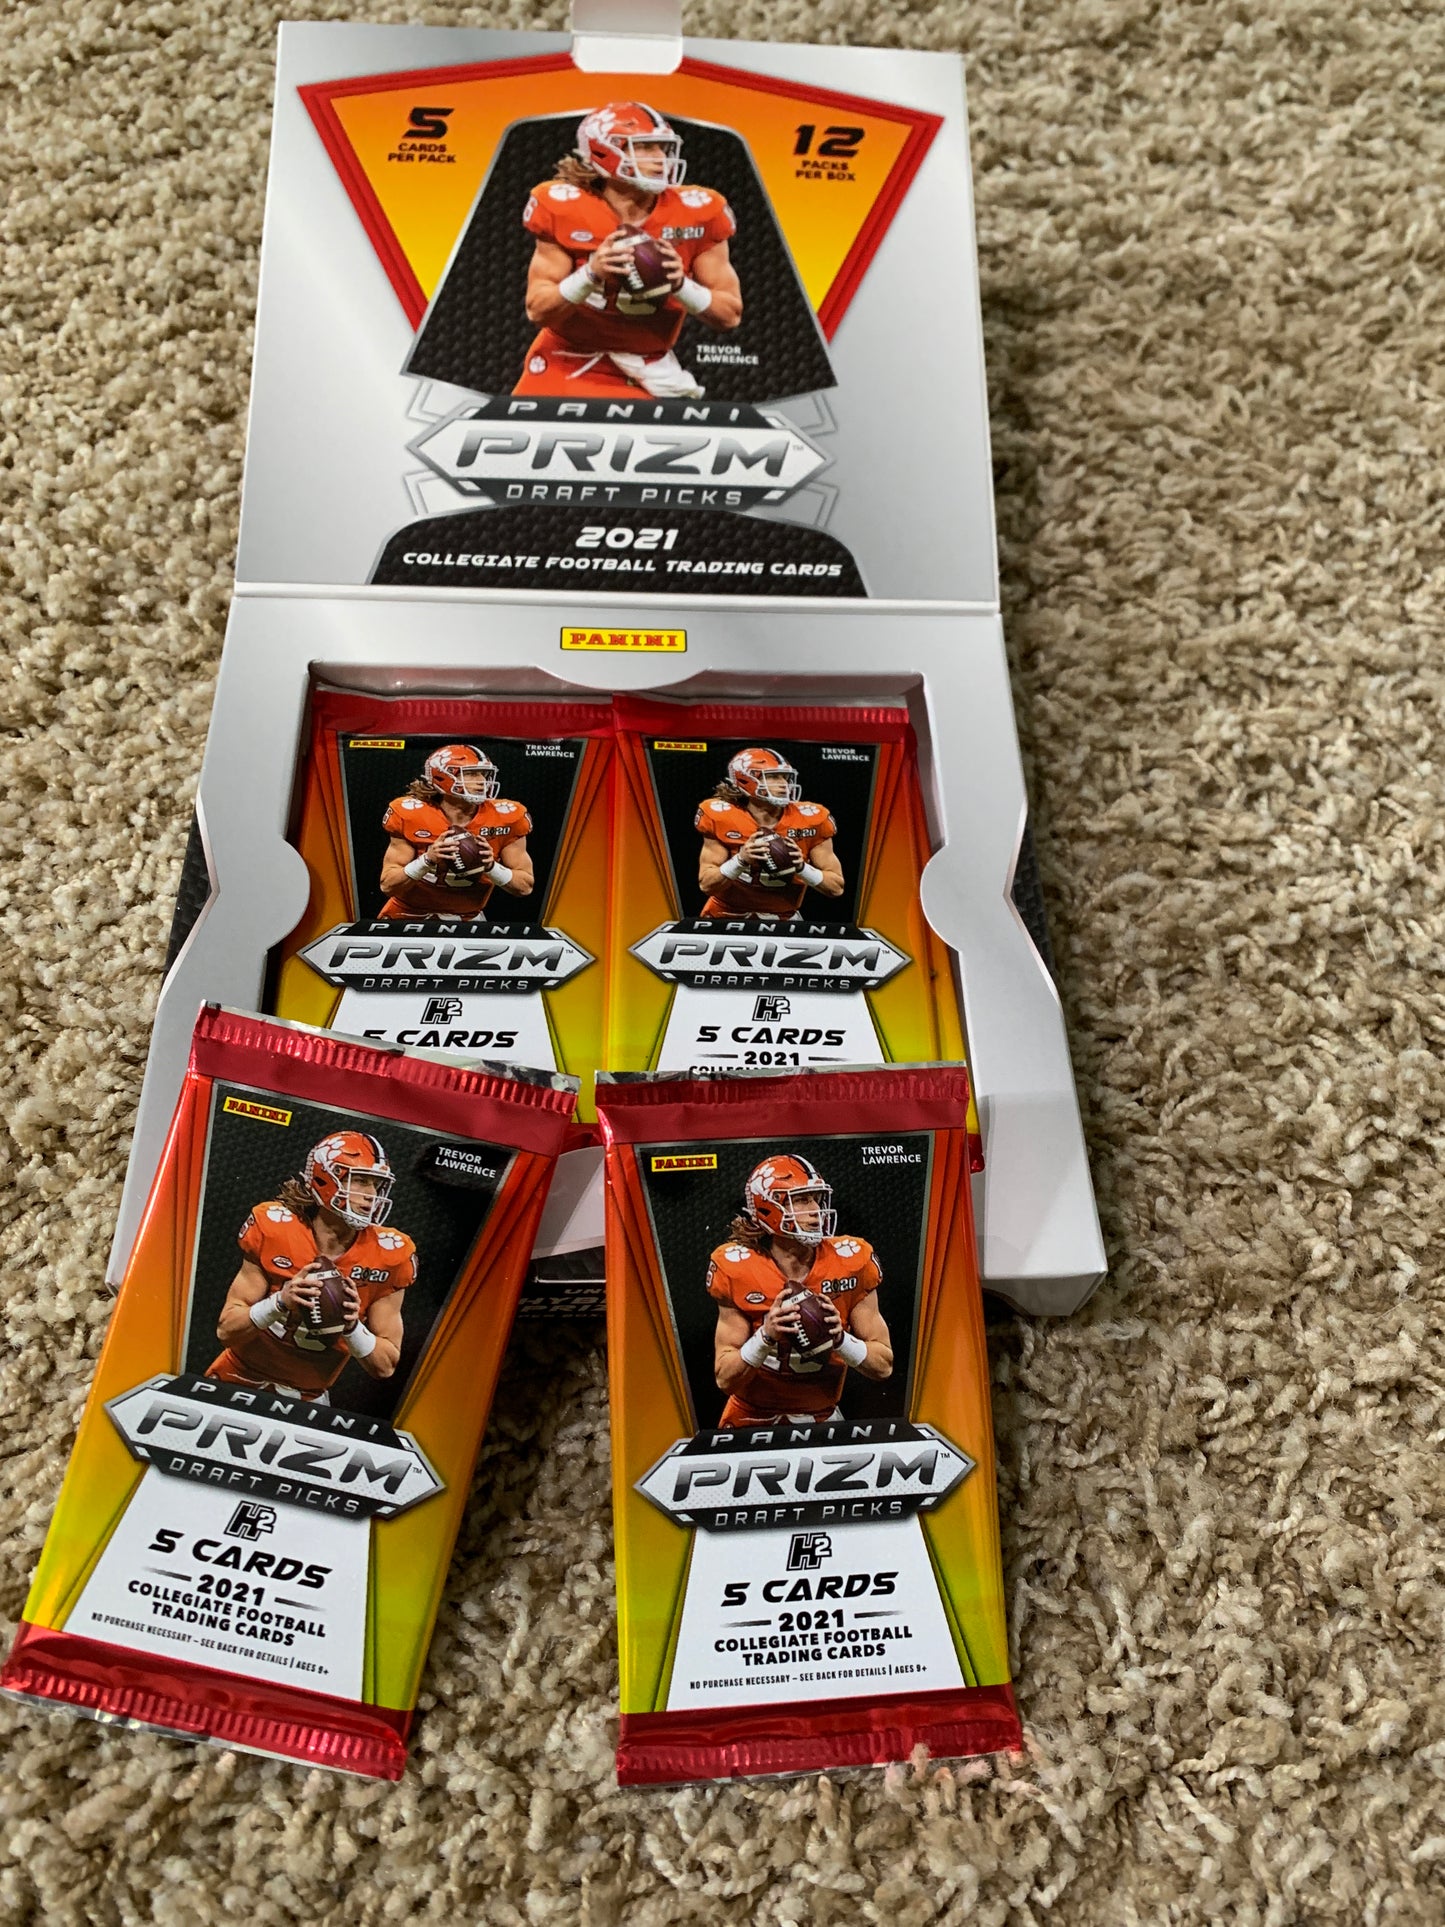 2021 Panini Prizm Draft Picks H2 Single Pack . With a Chance to pull 1 auto or silver prizm Lawrence,Lance,Jones, Chase Rookies